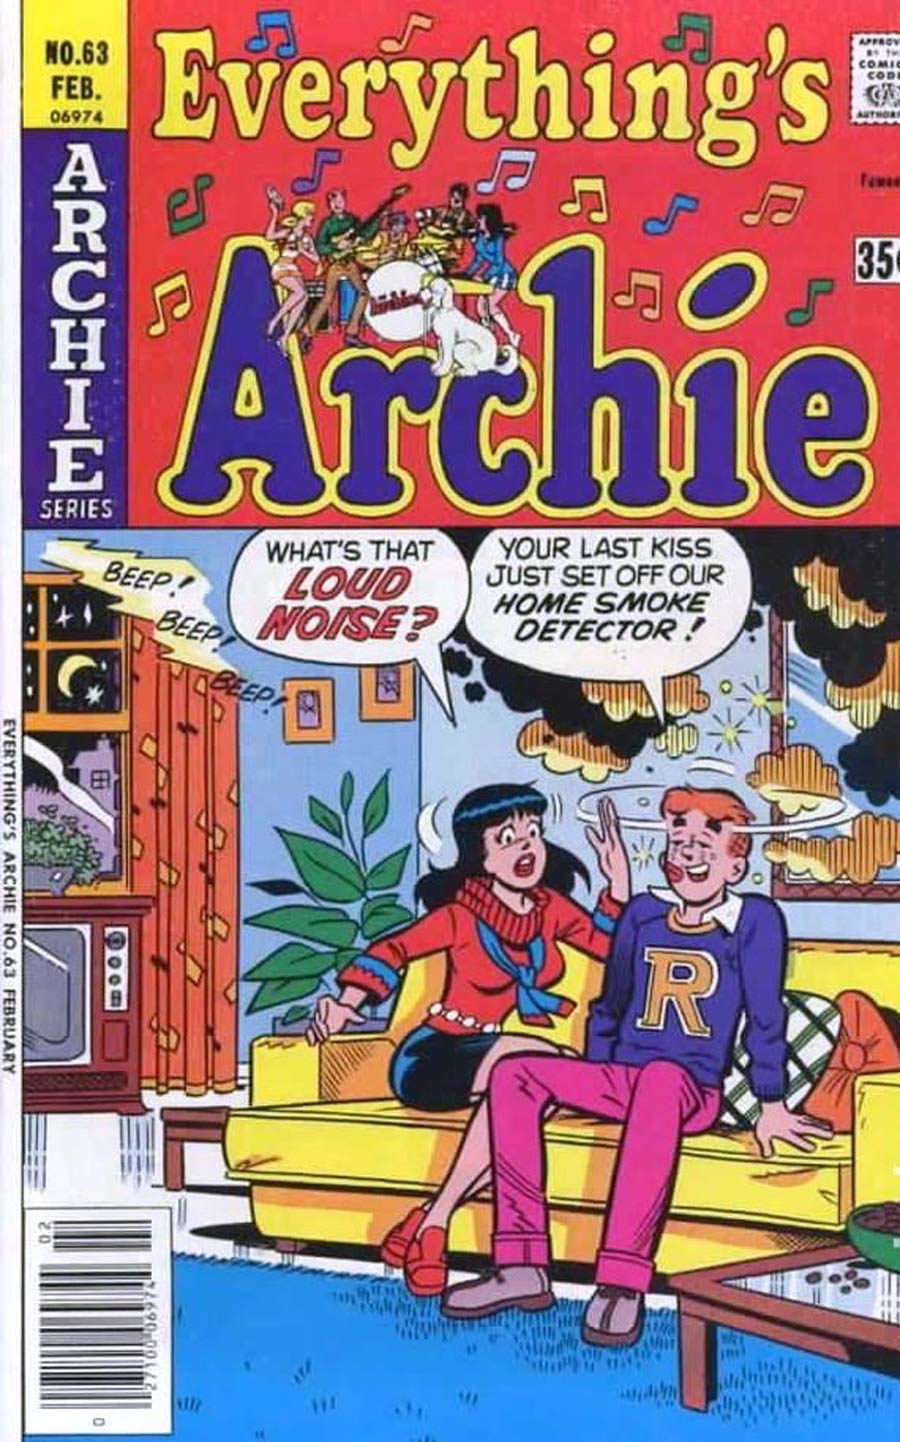 Everythings Archie #63